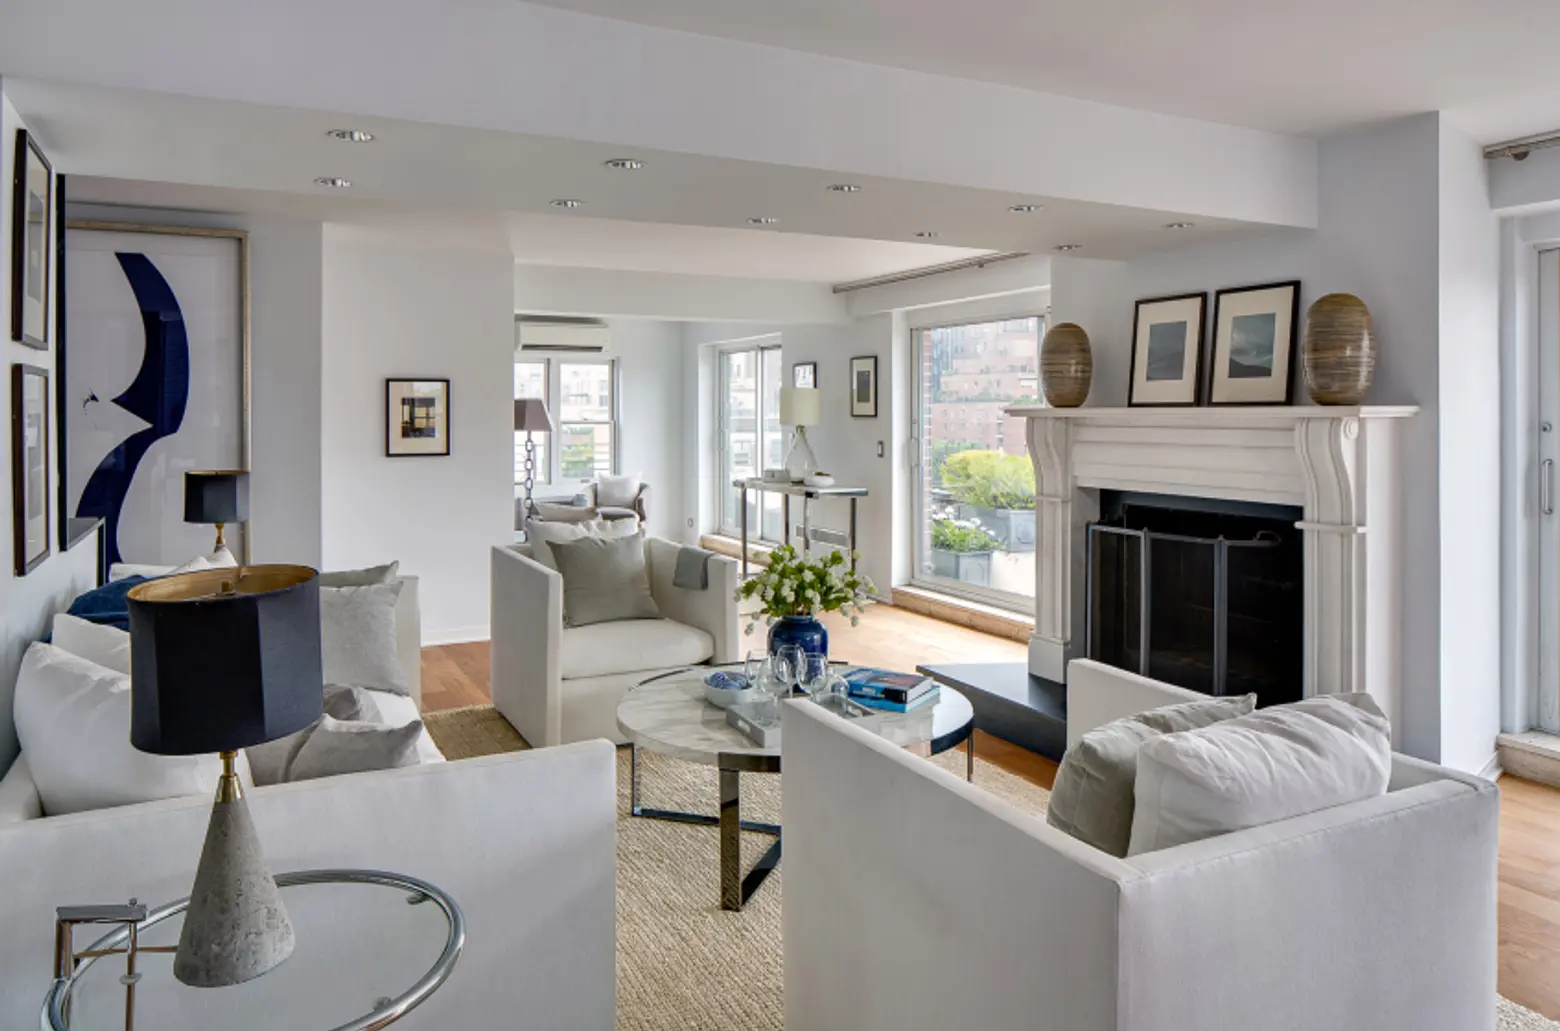 Julia Roberts Lists Greenwich Village Apartment for $4.5M